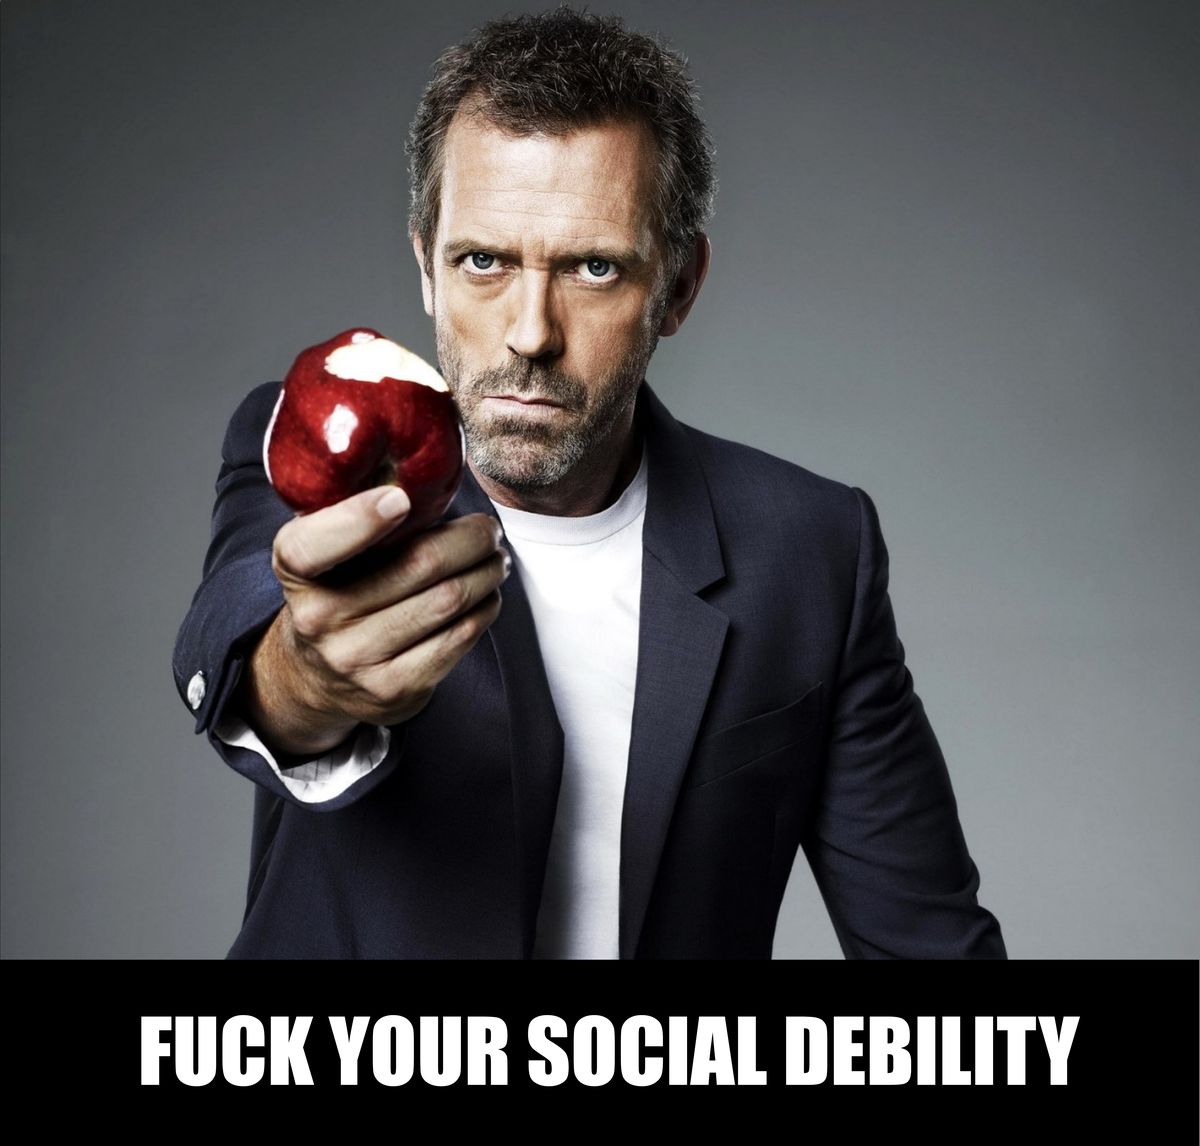 THINKING IN STYLE: Dr. House